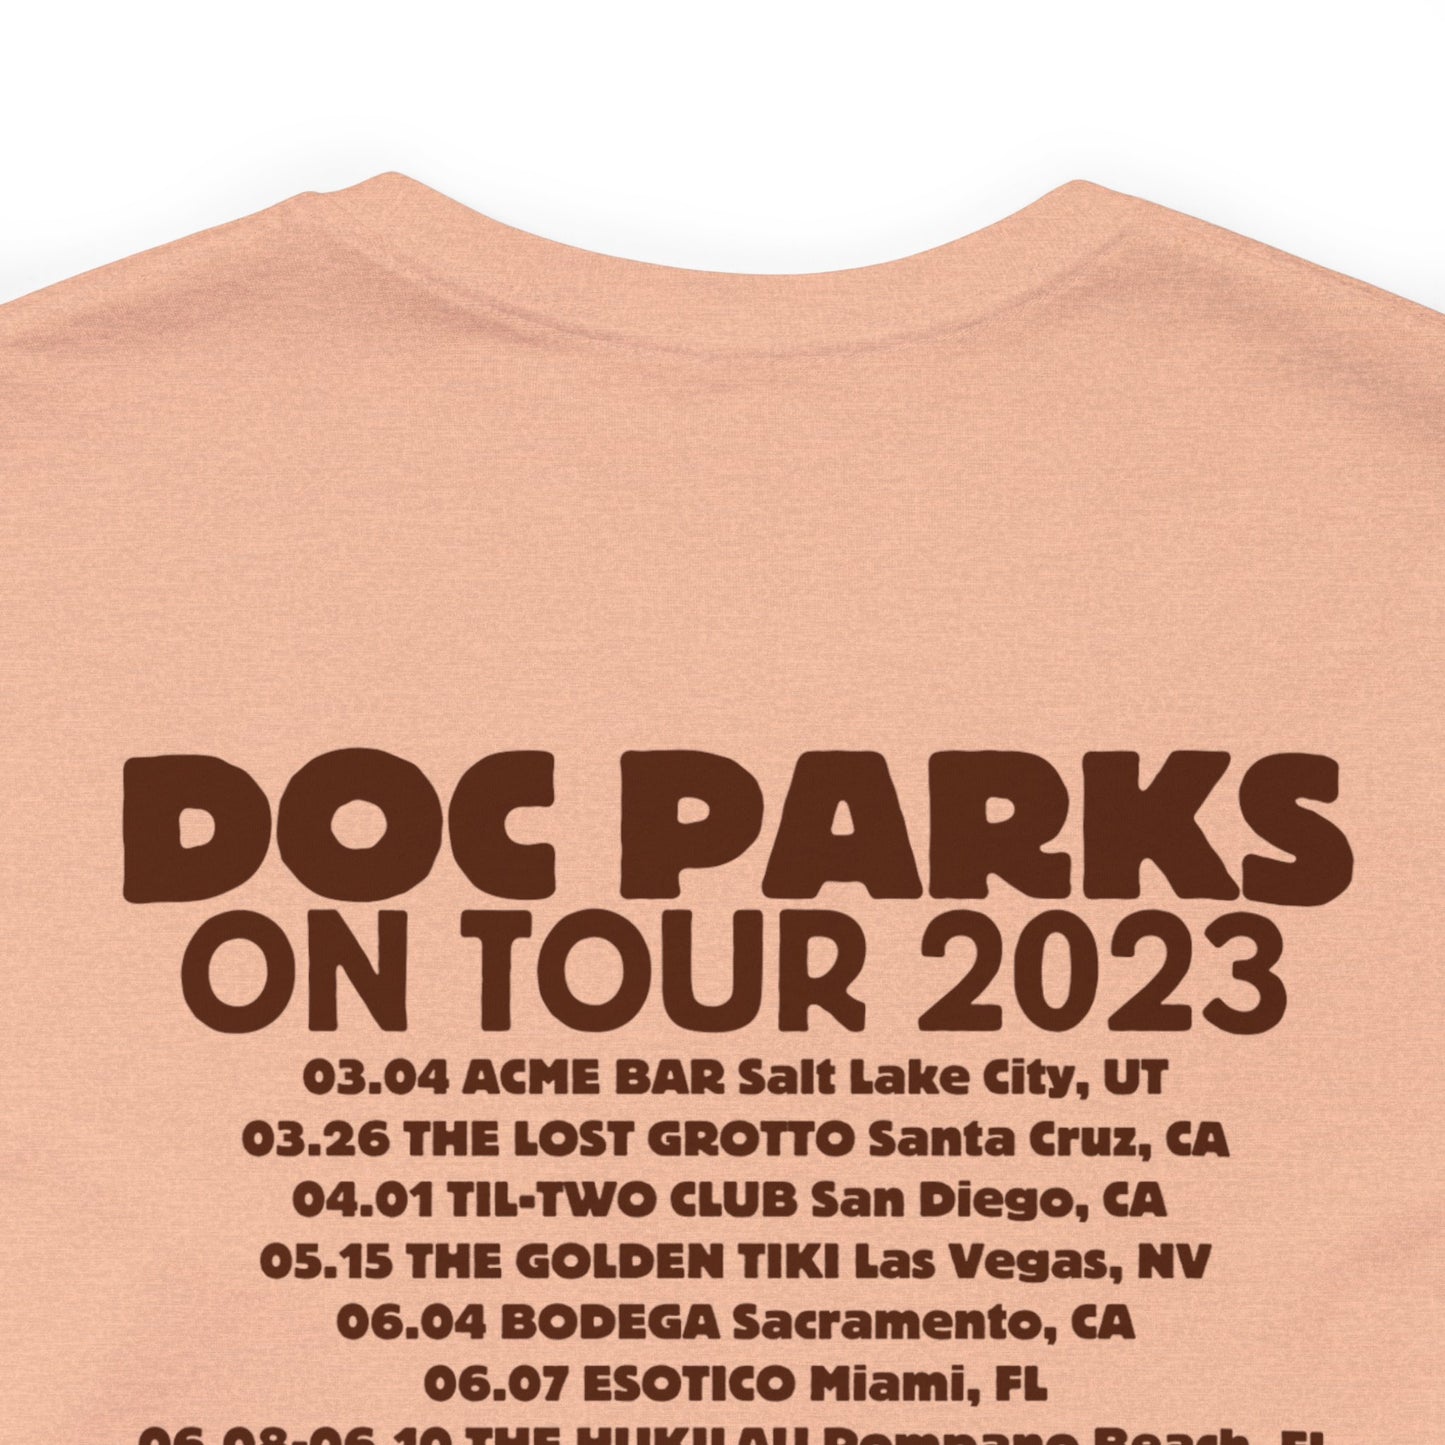 Doc Parks on Tour 2023 LIGHT COLORED TEES Unisex Jersey Short Sleeve Tee